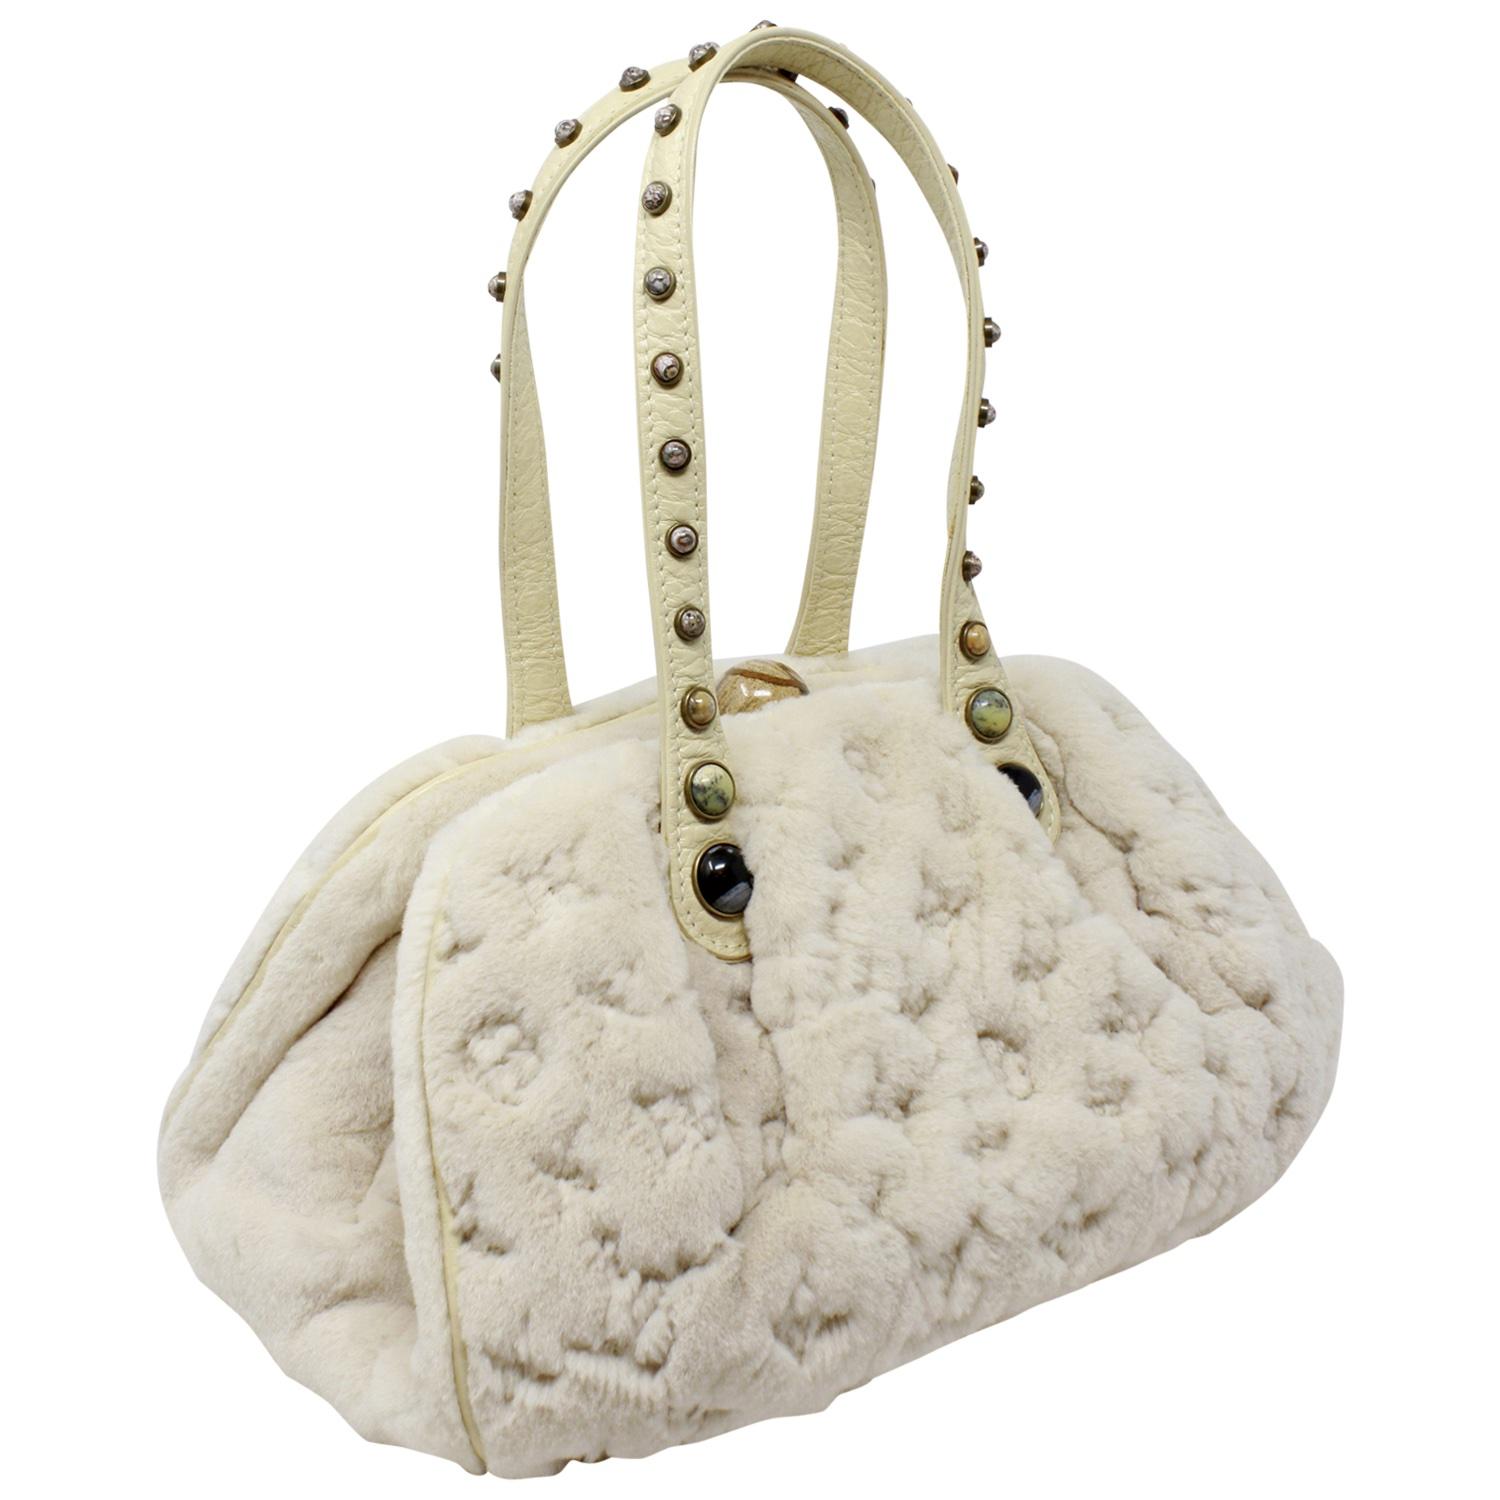 This iconic and rare beauty graced the runway in the 2005 Louis Vuitton FallWinter Collection and was created by creative director Marc Jacobs. It is so special and unique that it completely leaves us speechless! Crafted in cream mink and tonal